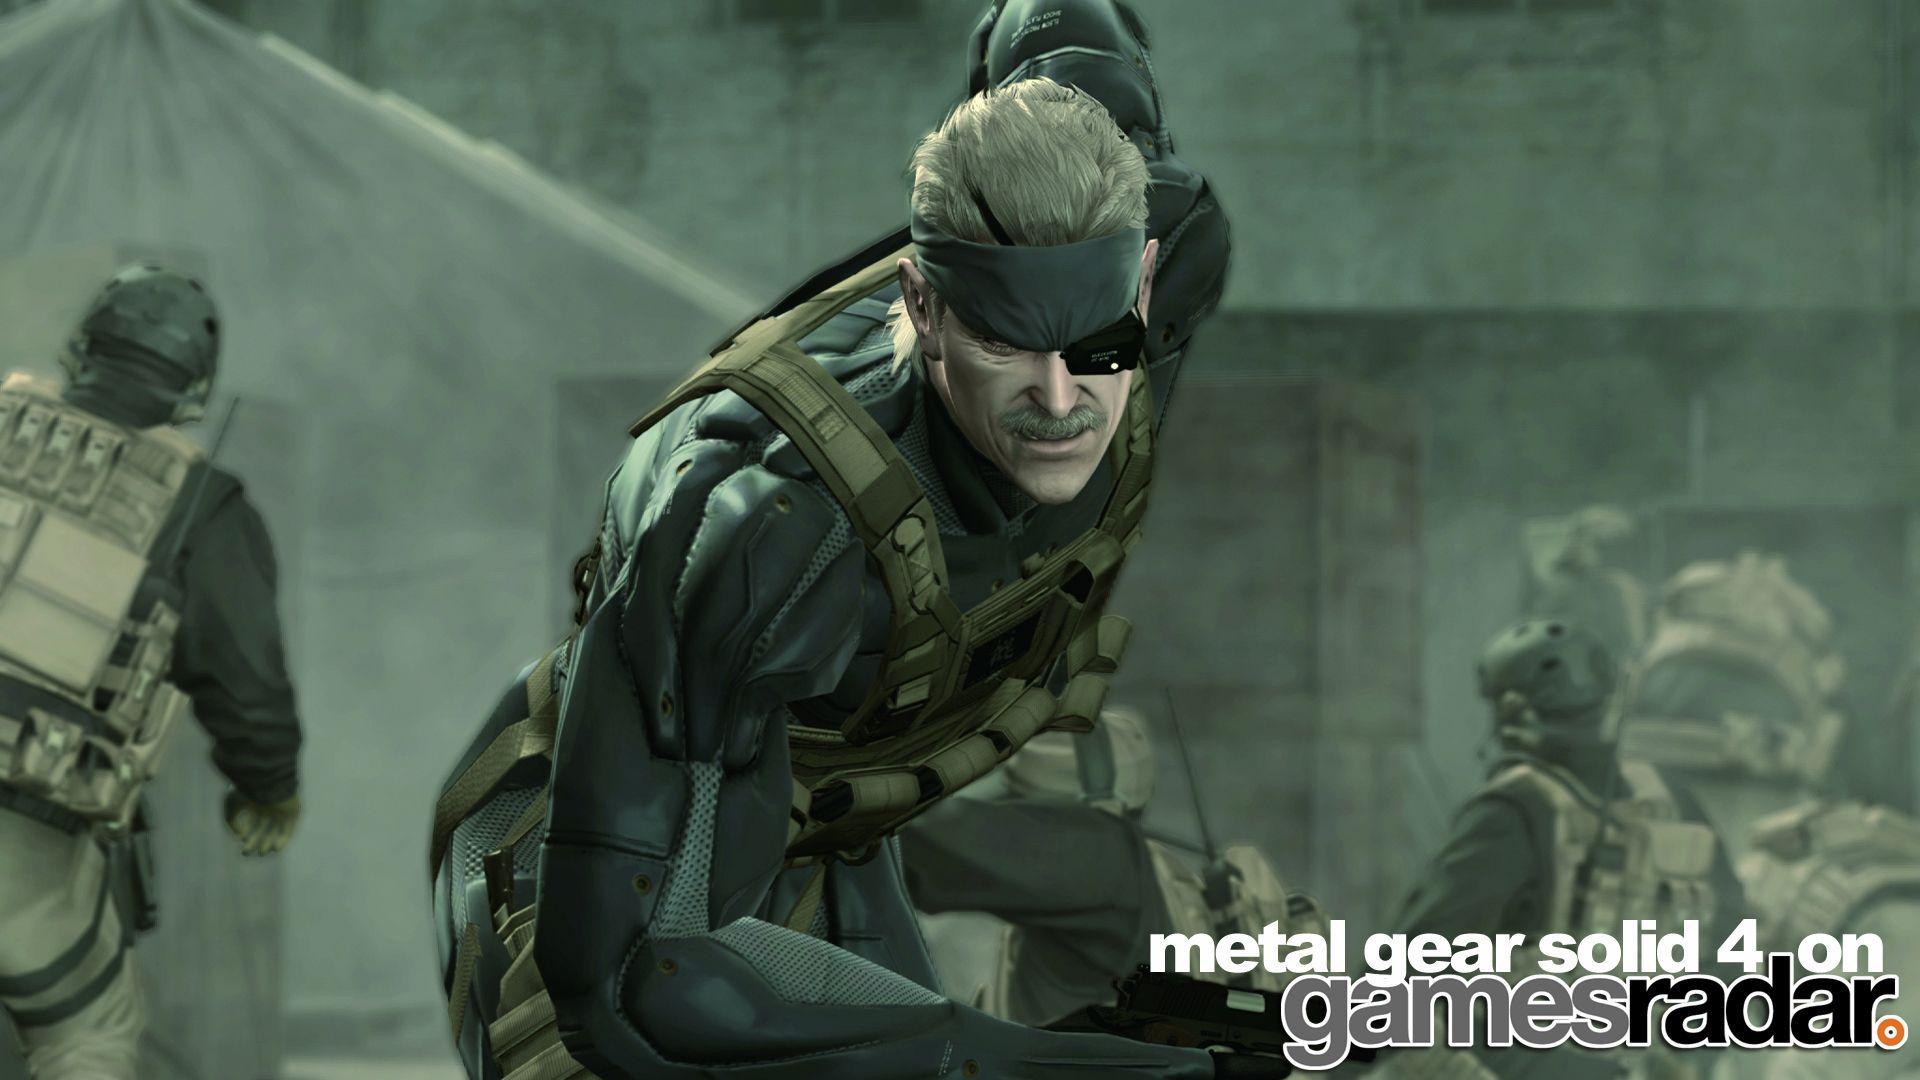 Games: Metal Gear Solid 4: Guns of the Patriots, picture nr. 33974